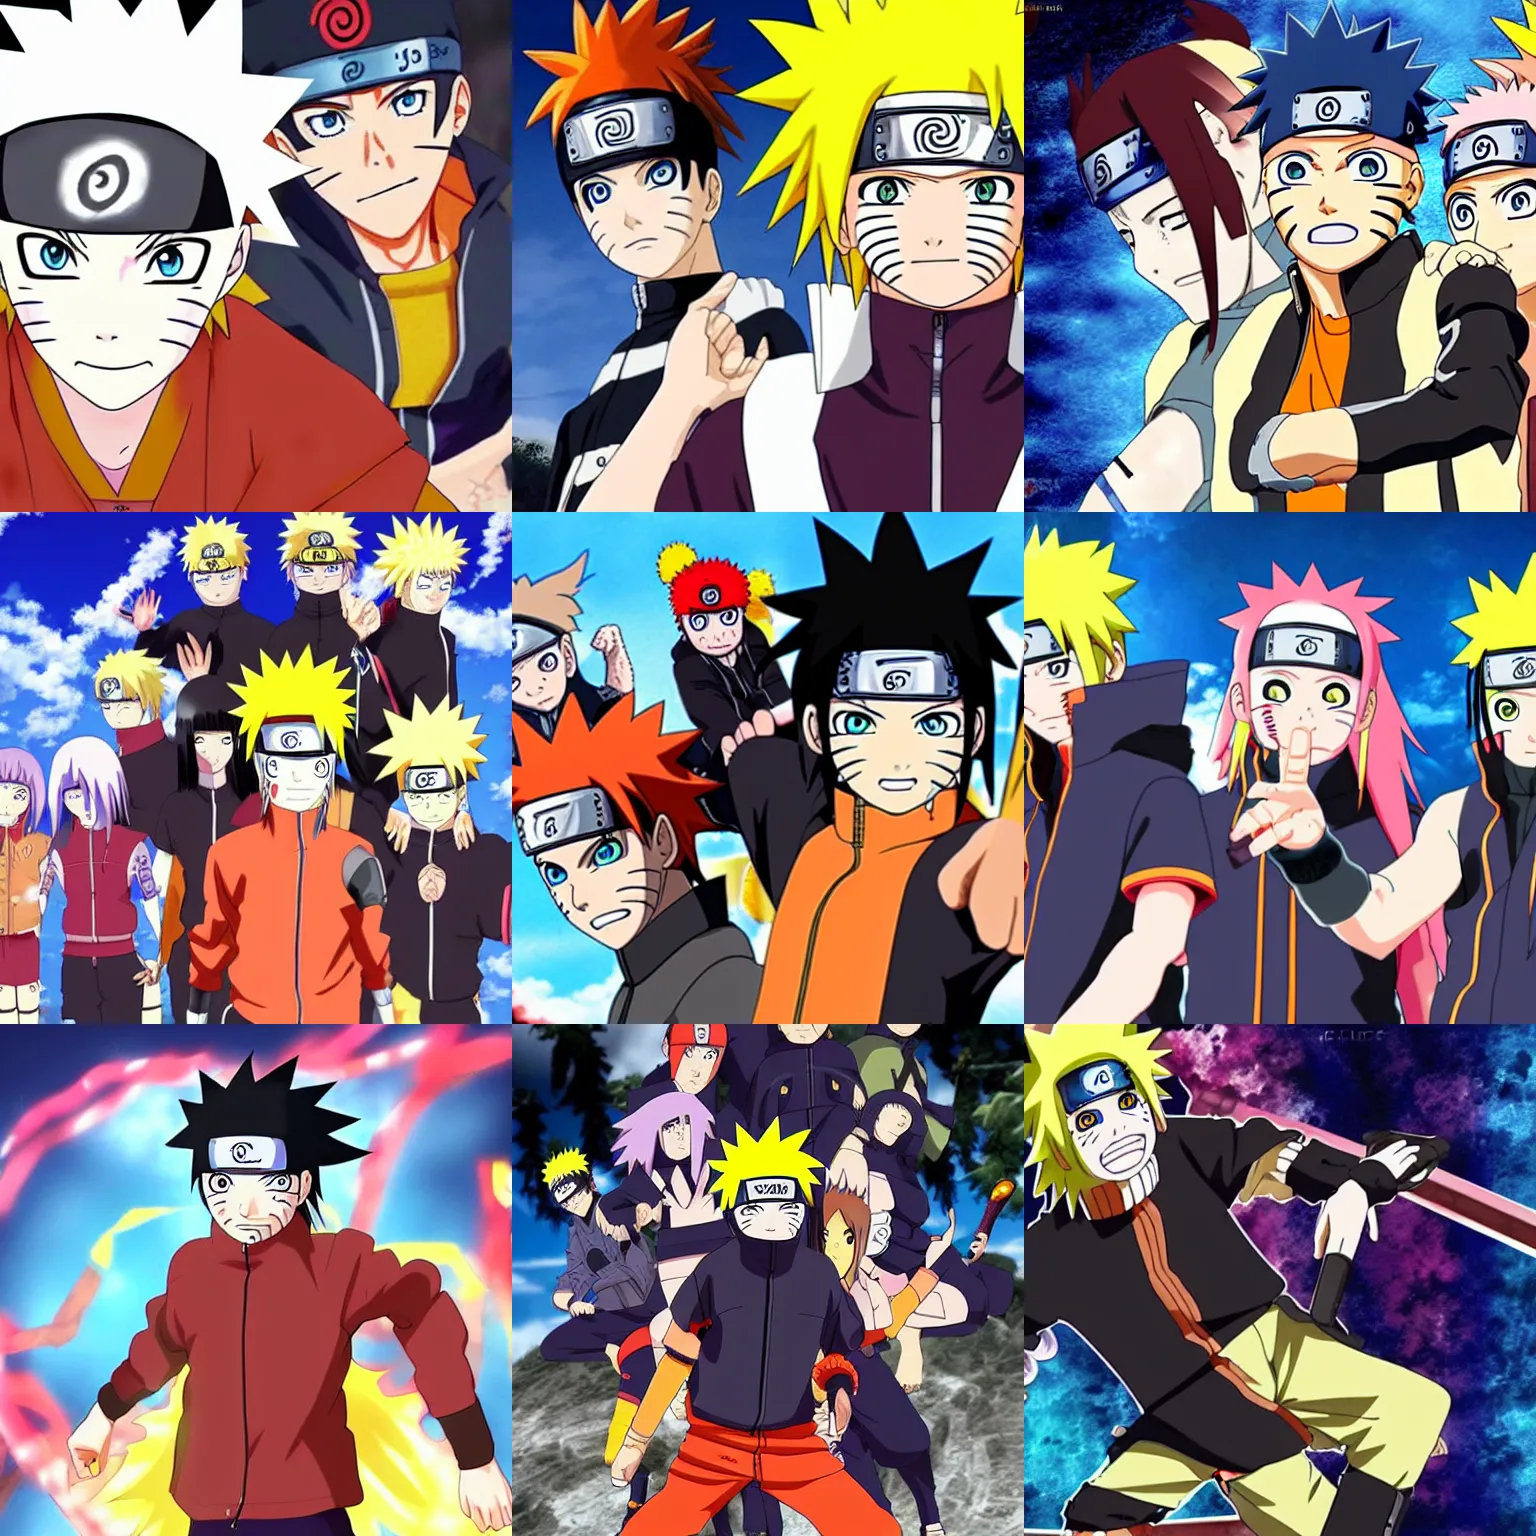 Prompt: What would the Naruto anime look like if it were good